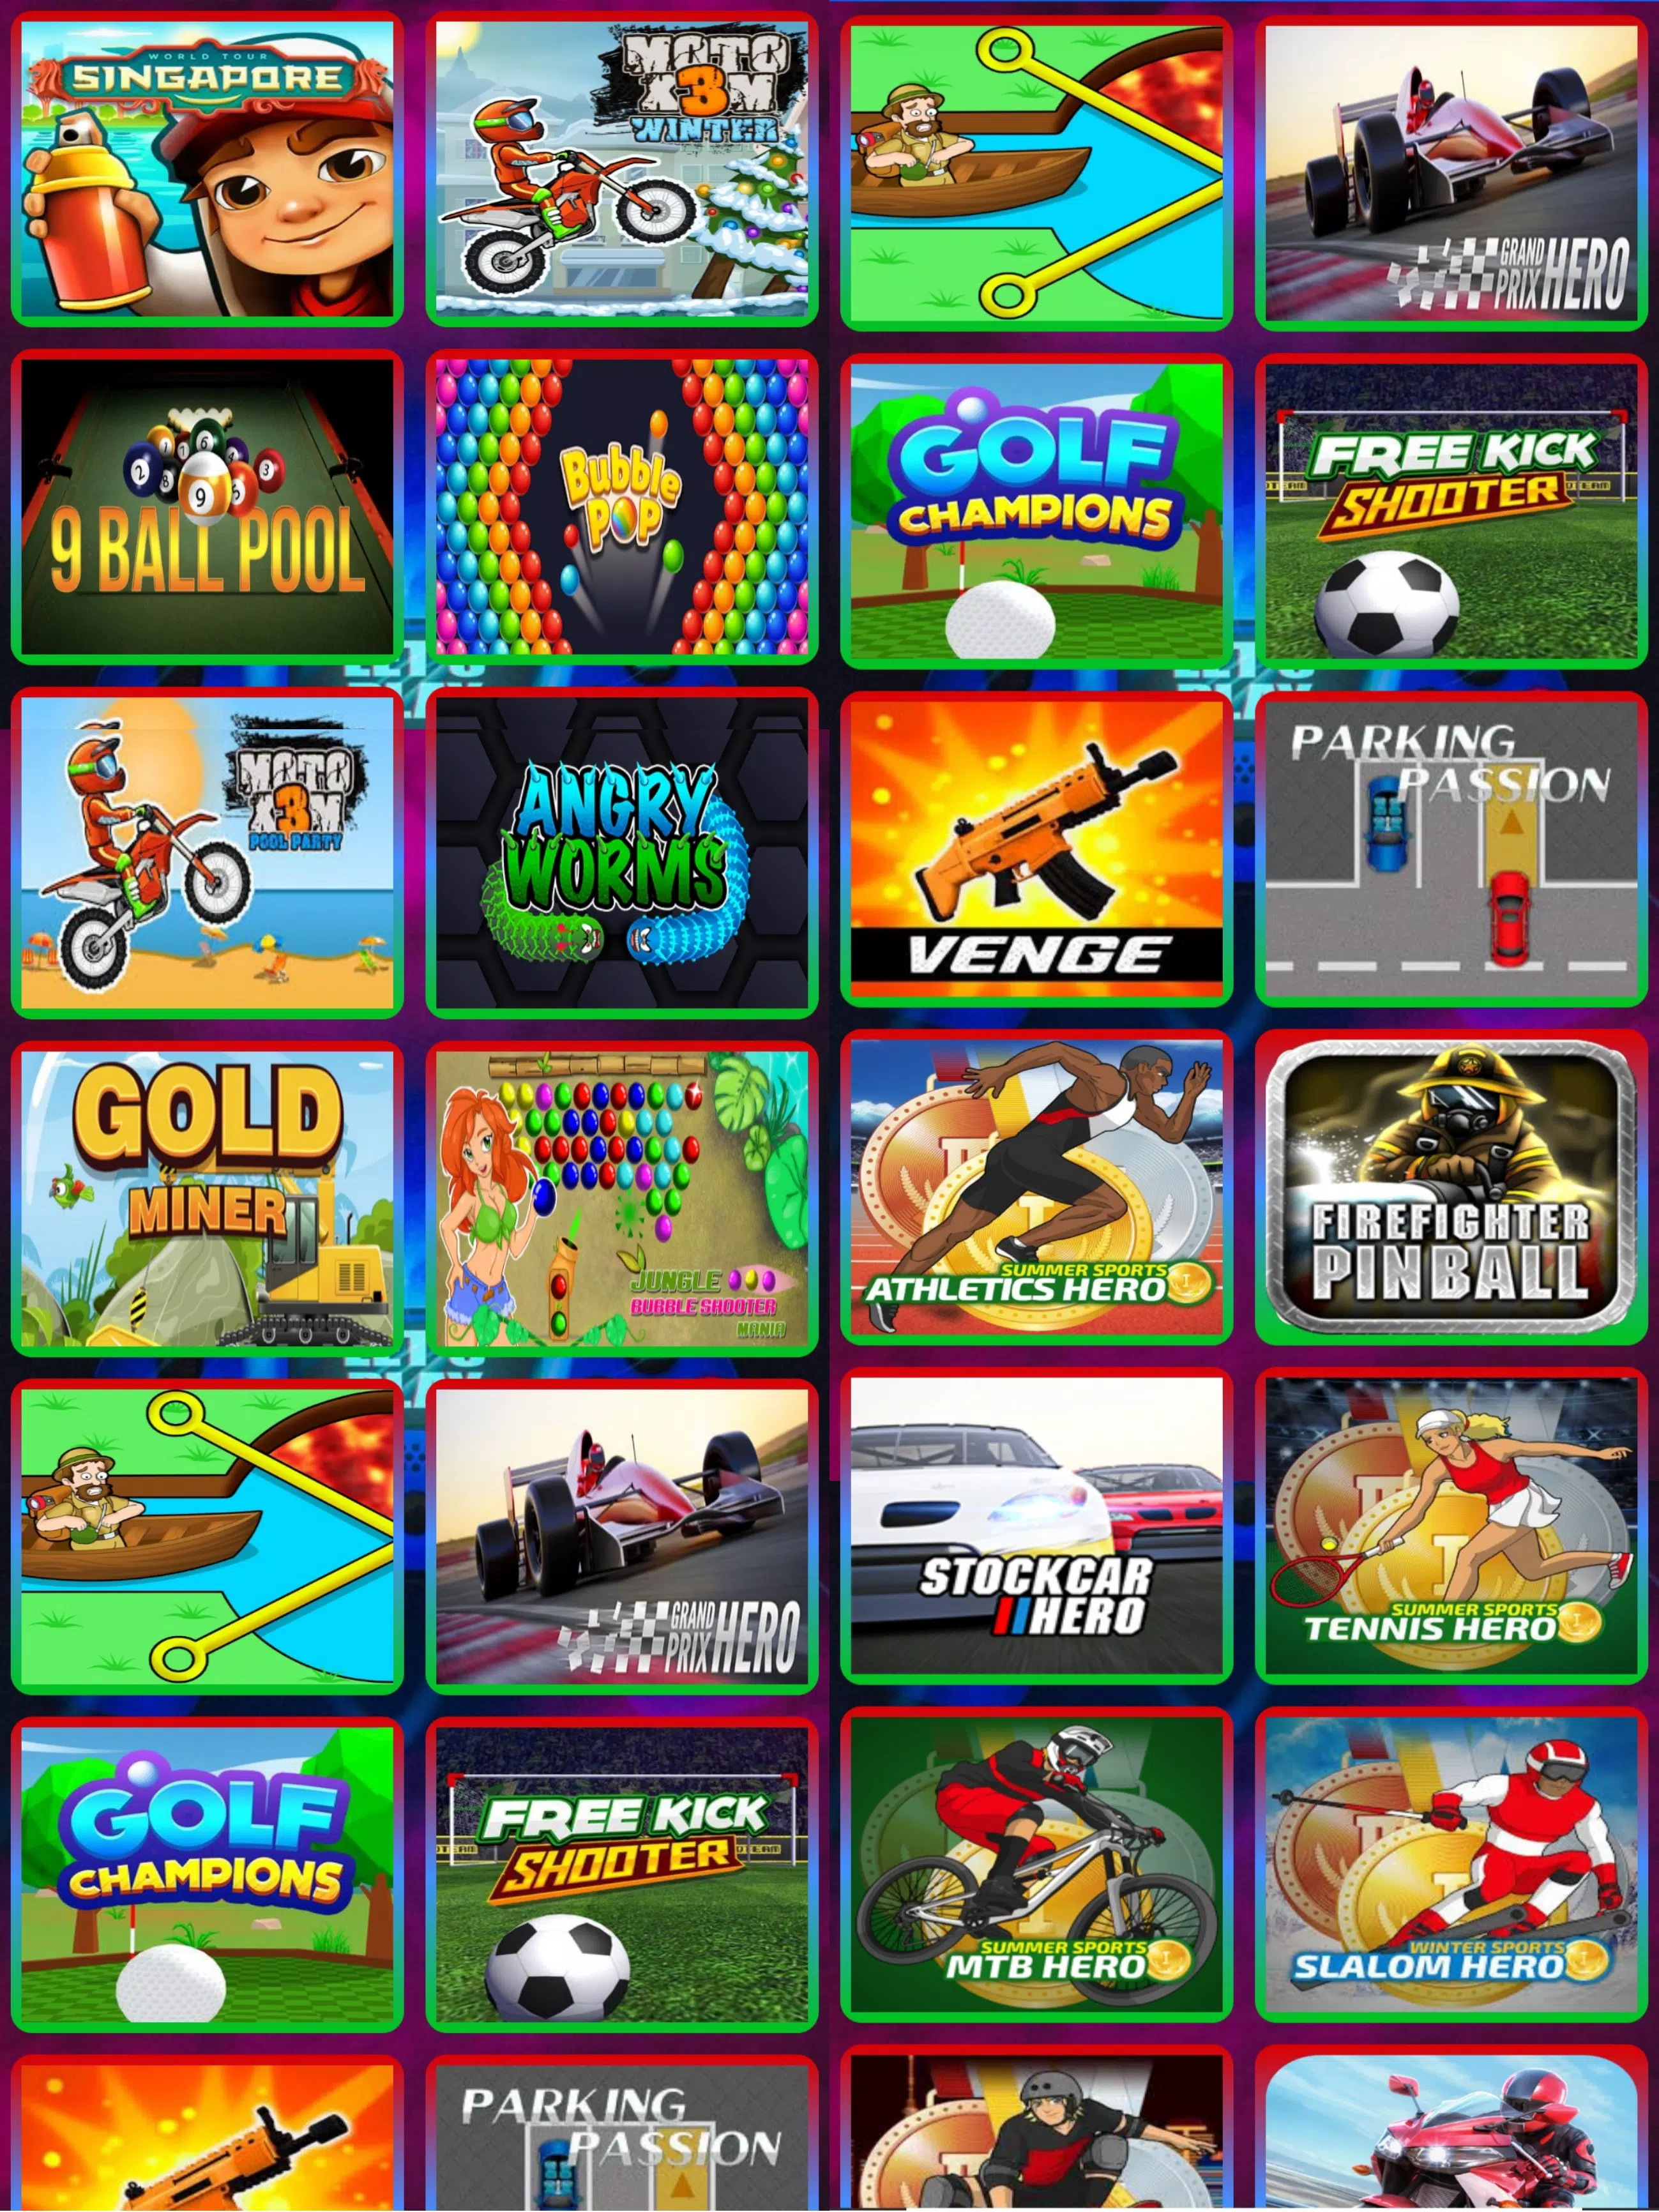 1000 Free Games APK (Android Game) - Free Download